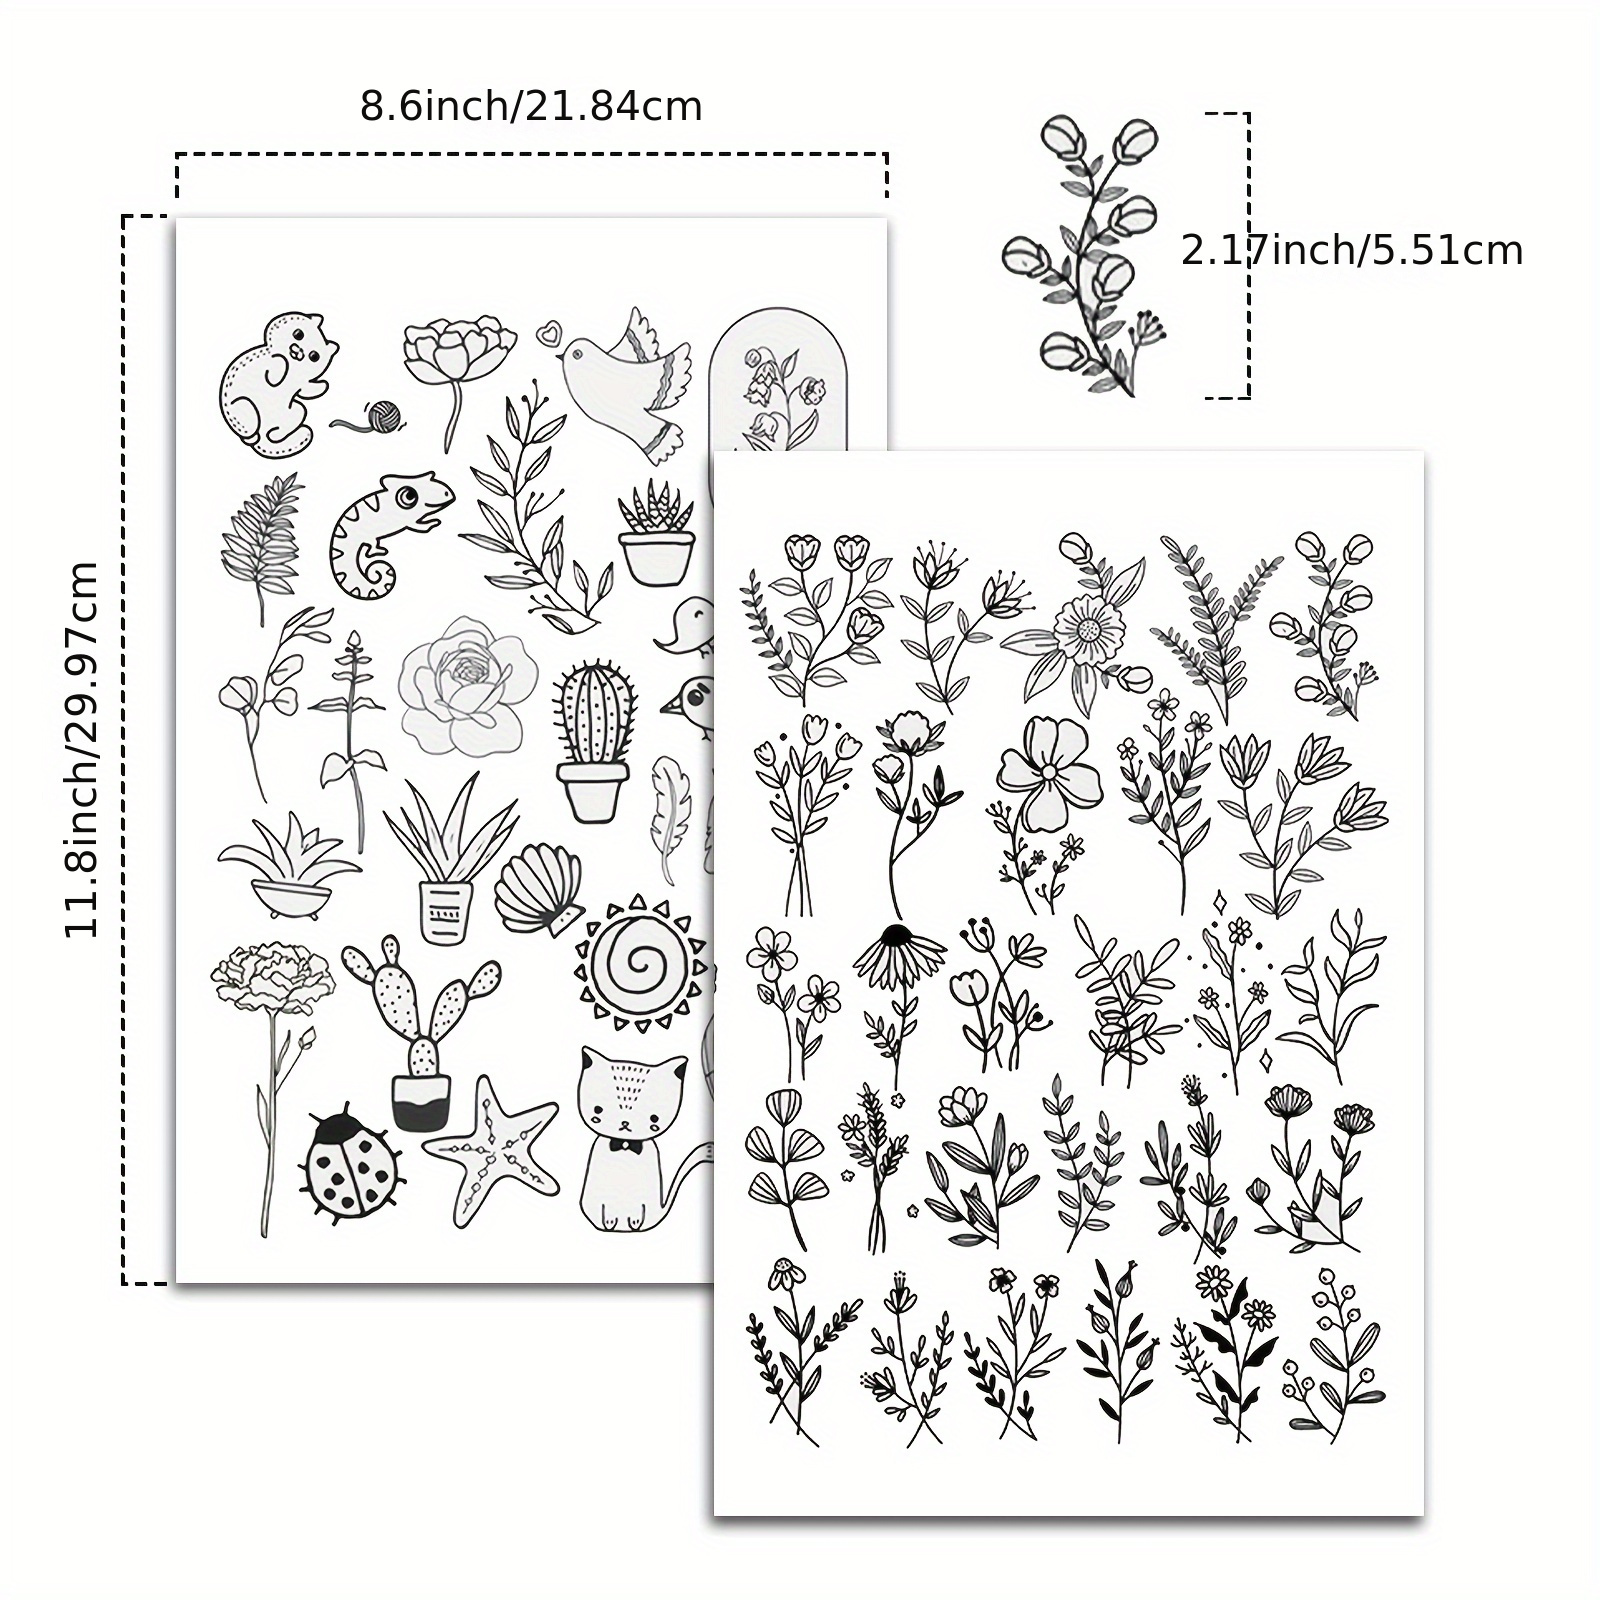  Water Soluble Embroidery Patterns 50pcs Embroidery Stick And  Stitch Patterns Transfers Water Soluble Stabilizer For Embroidery Stick And  Stitch Embroidery Designs